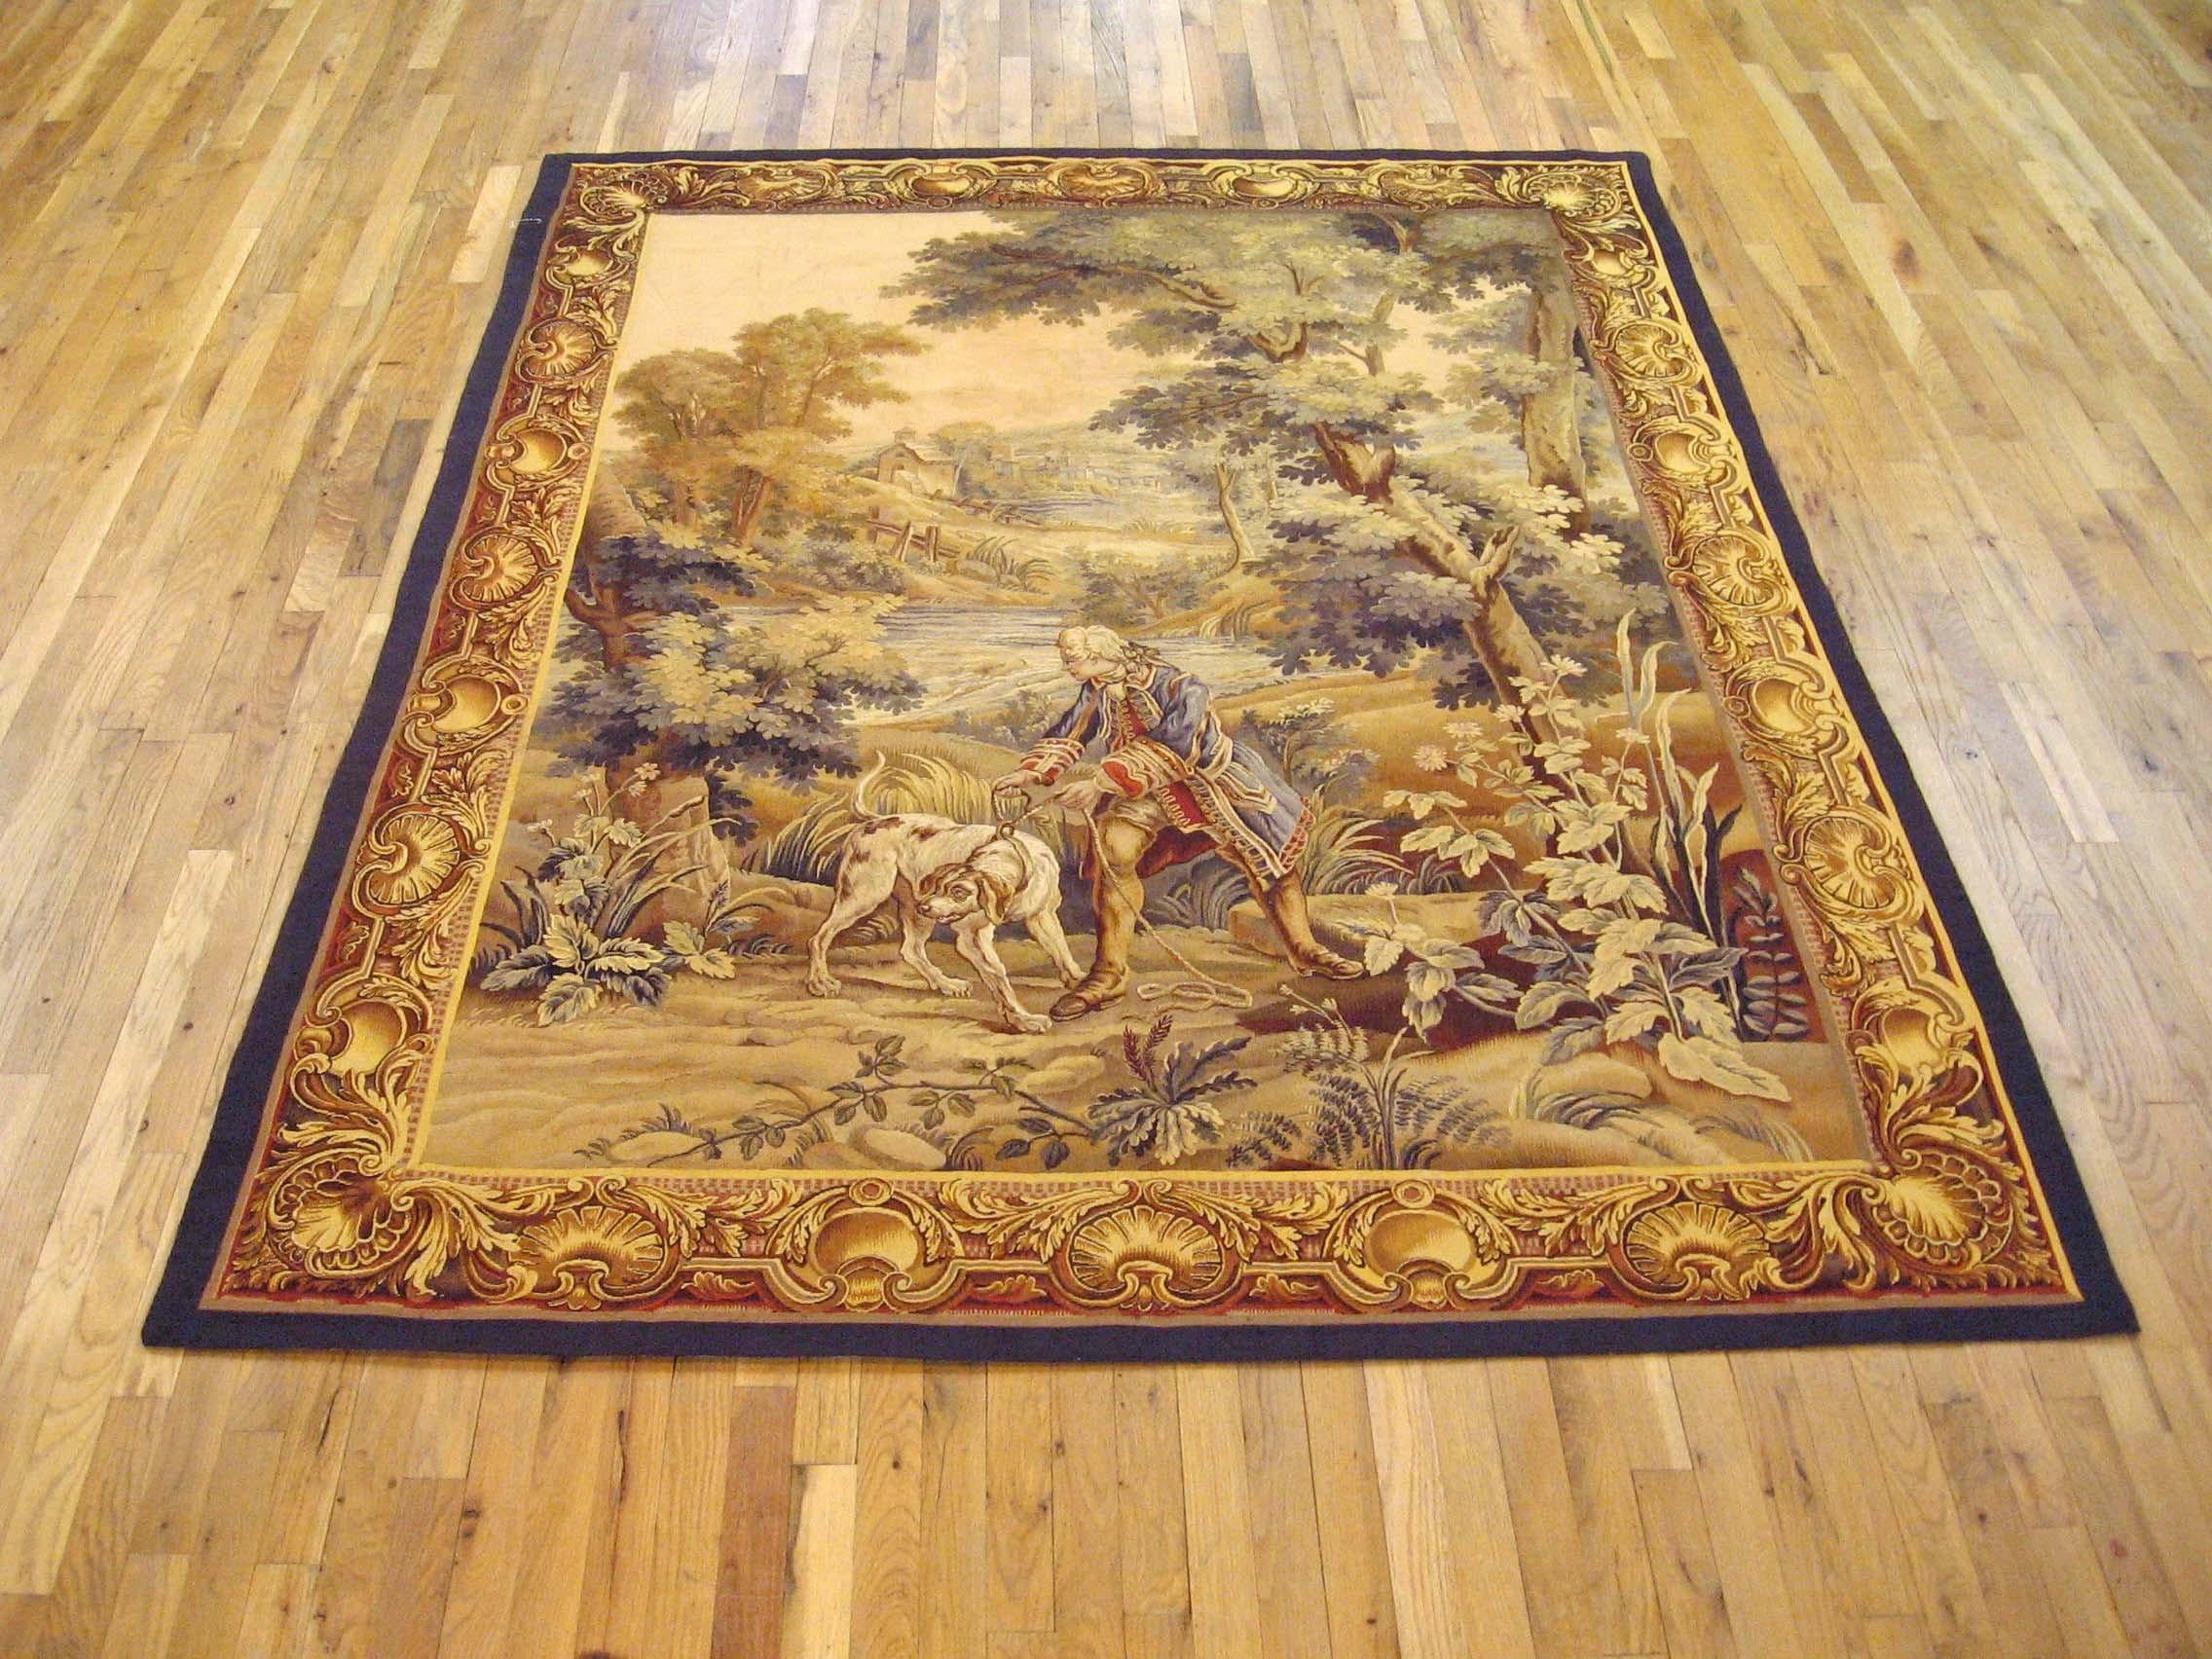 A French hunting tapestry from the late 19th century, envisioning a scene in which a nobleman leads his hound through a verdant area in search of the day’s hunt, with a stately tree at right and a pond and rolling hills in the background. Enclosed